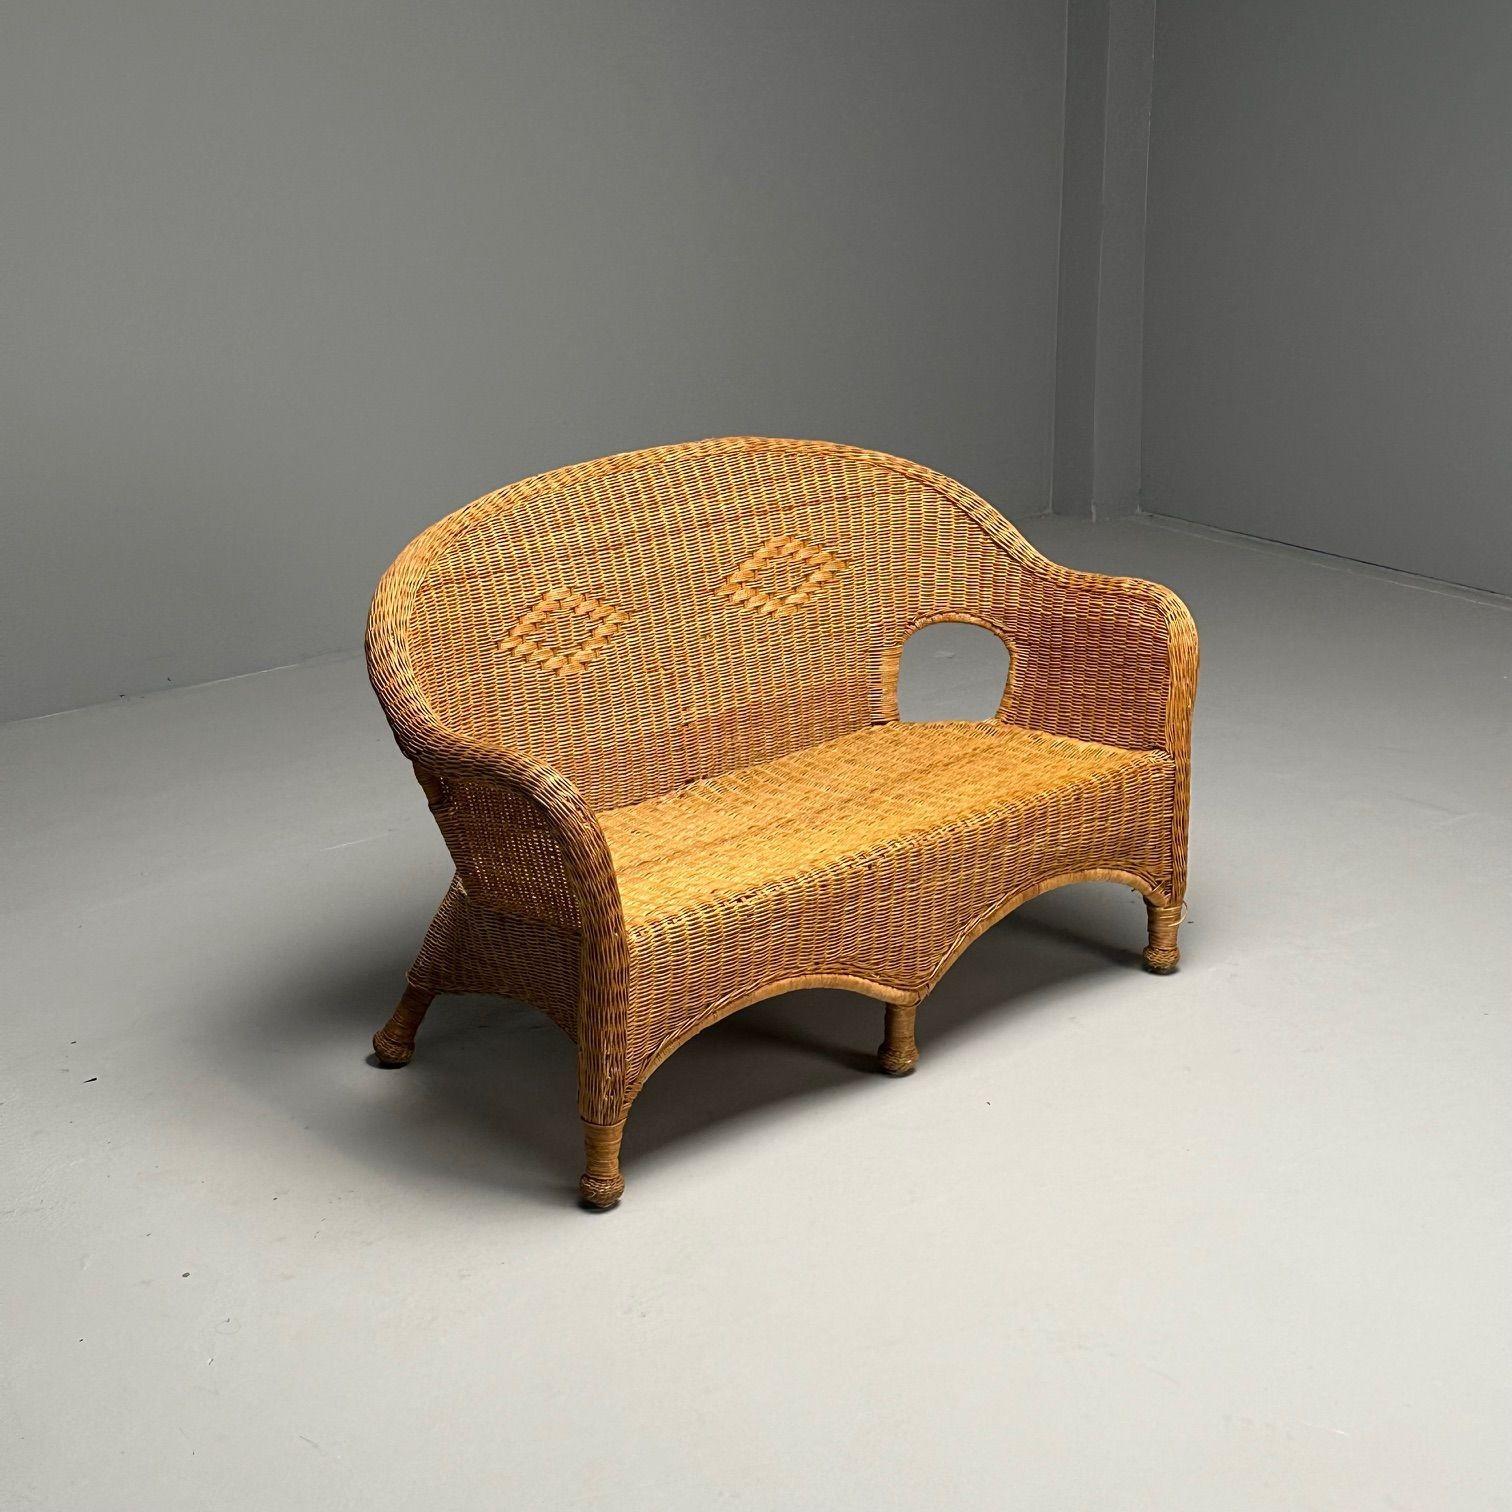 American Designer, Mid-Century Modern, Wicker Settee, USA, 1970s In Fair Condition For Sale In Stamford, CT